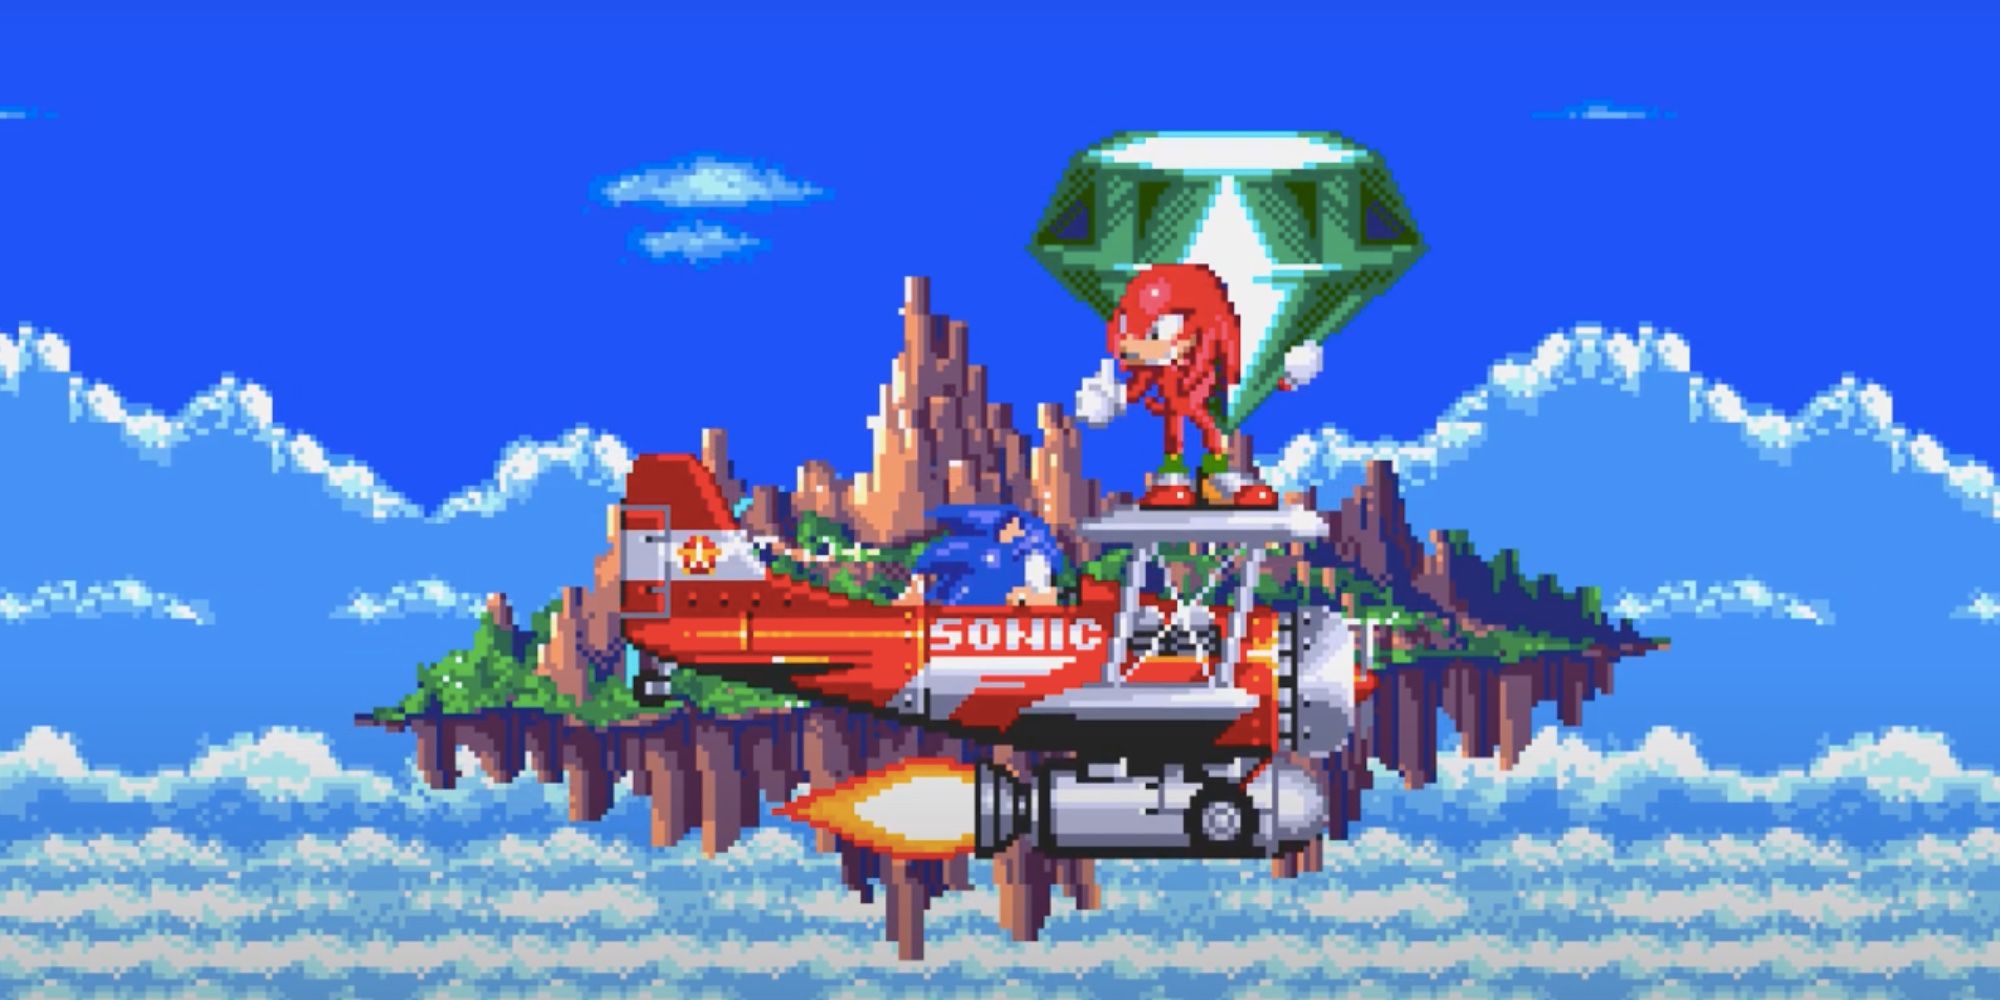 Sonic helping Knuckles return the master emerald in Sonic 3